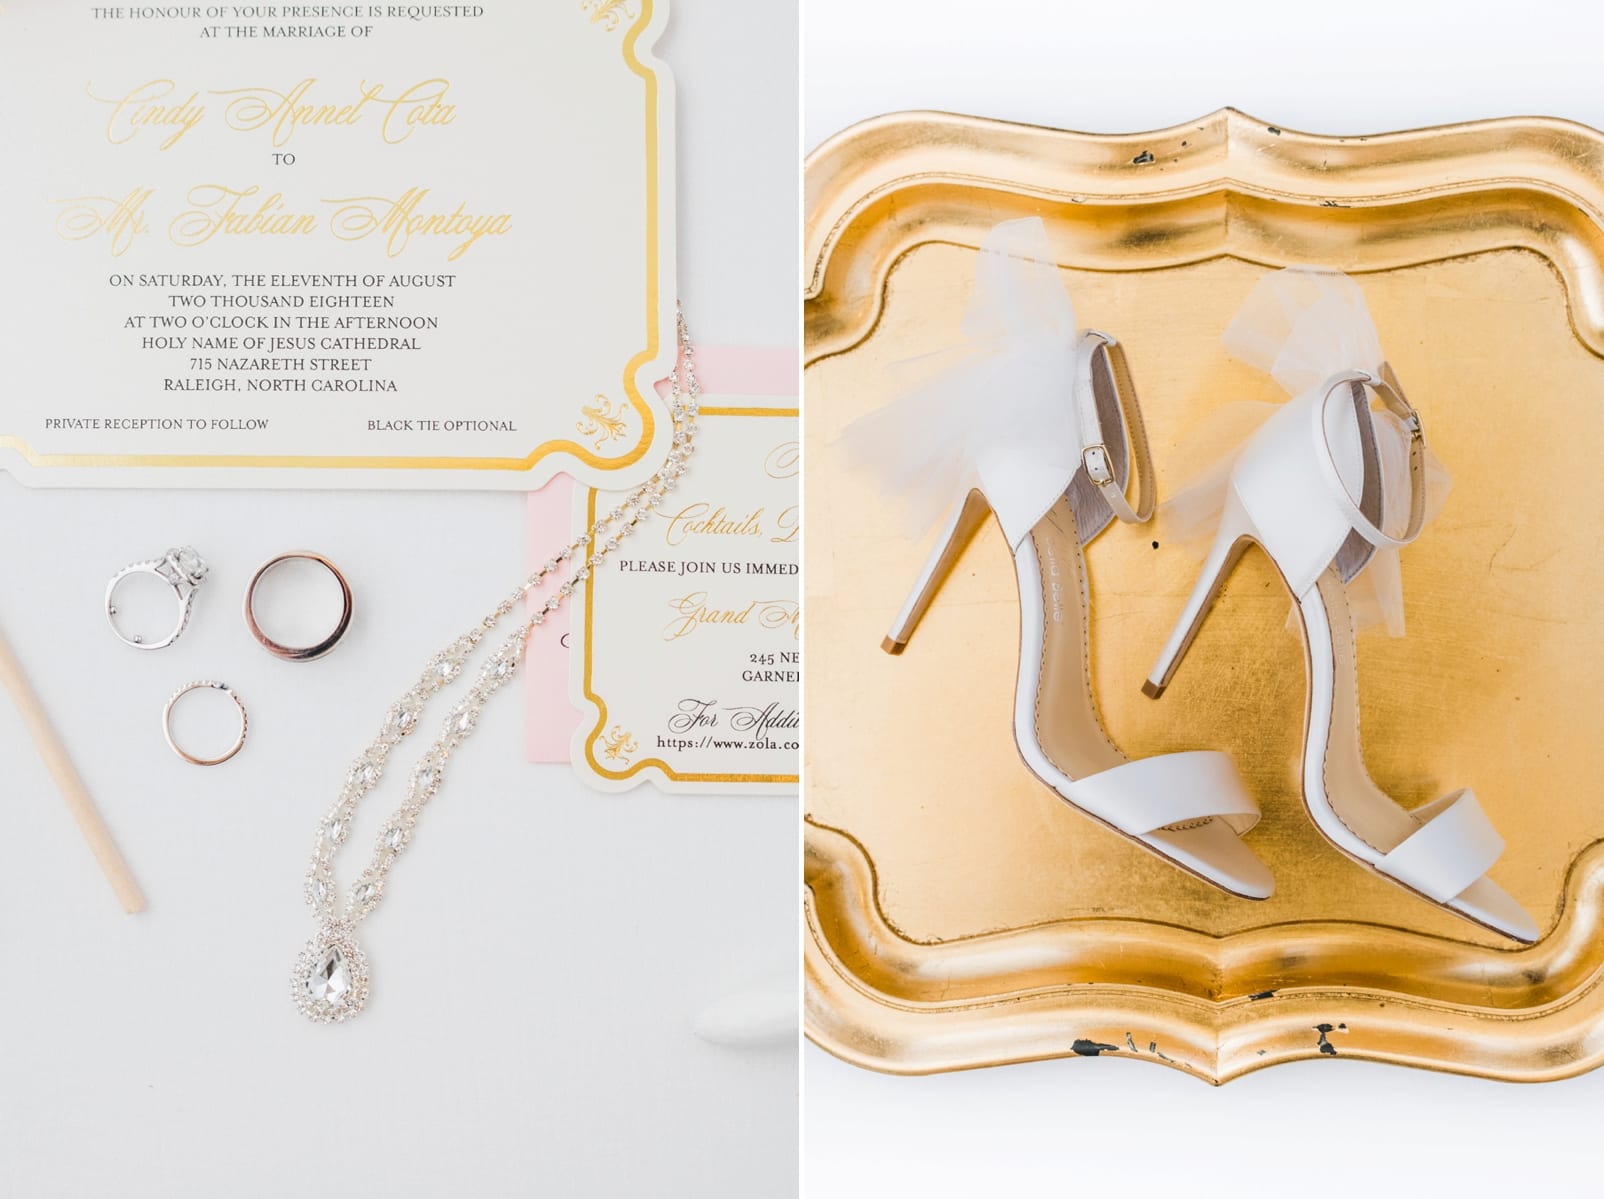 Theresa Jatko Designs invitation suite with gold and pink accents photo